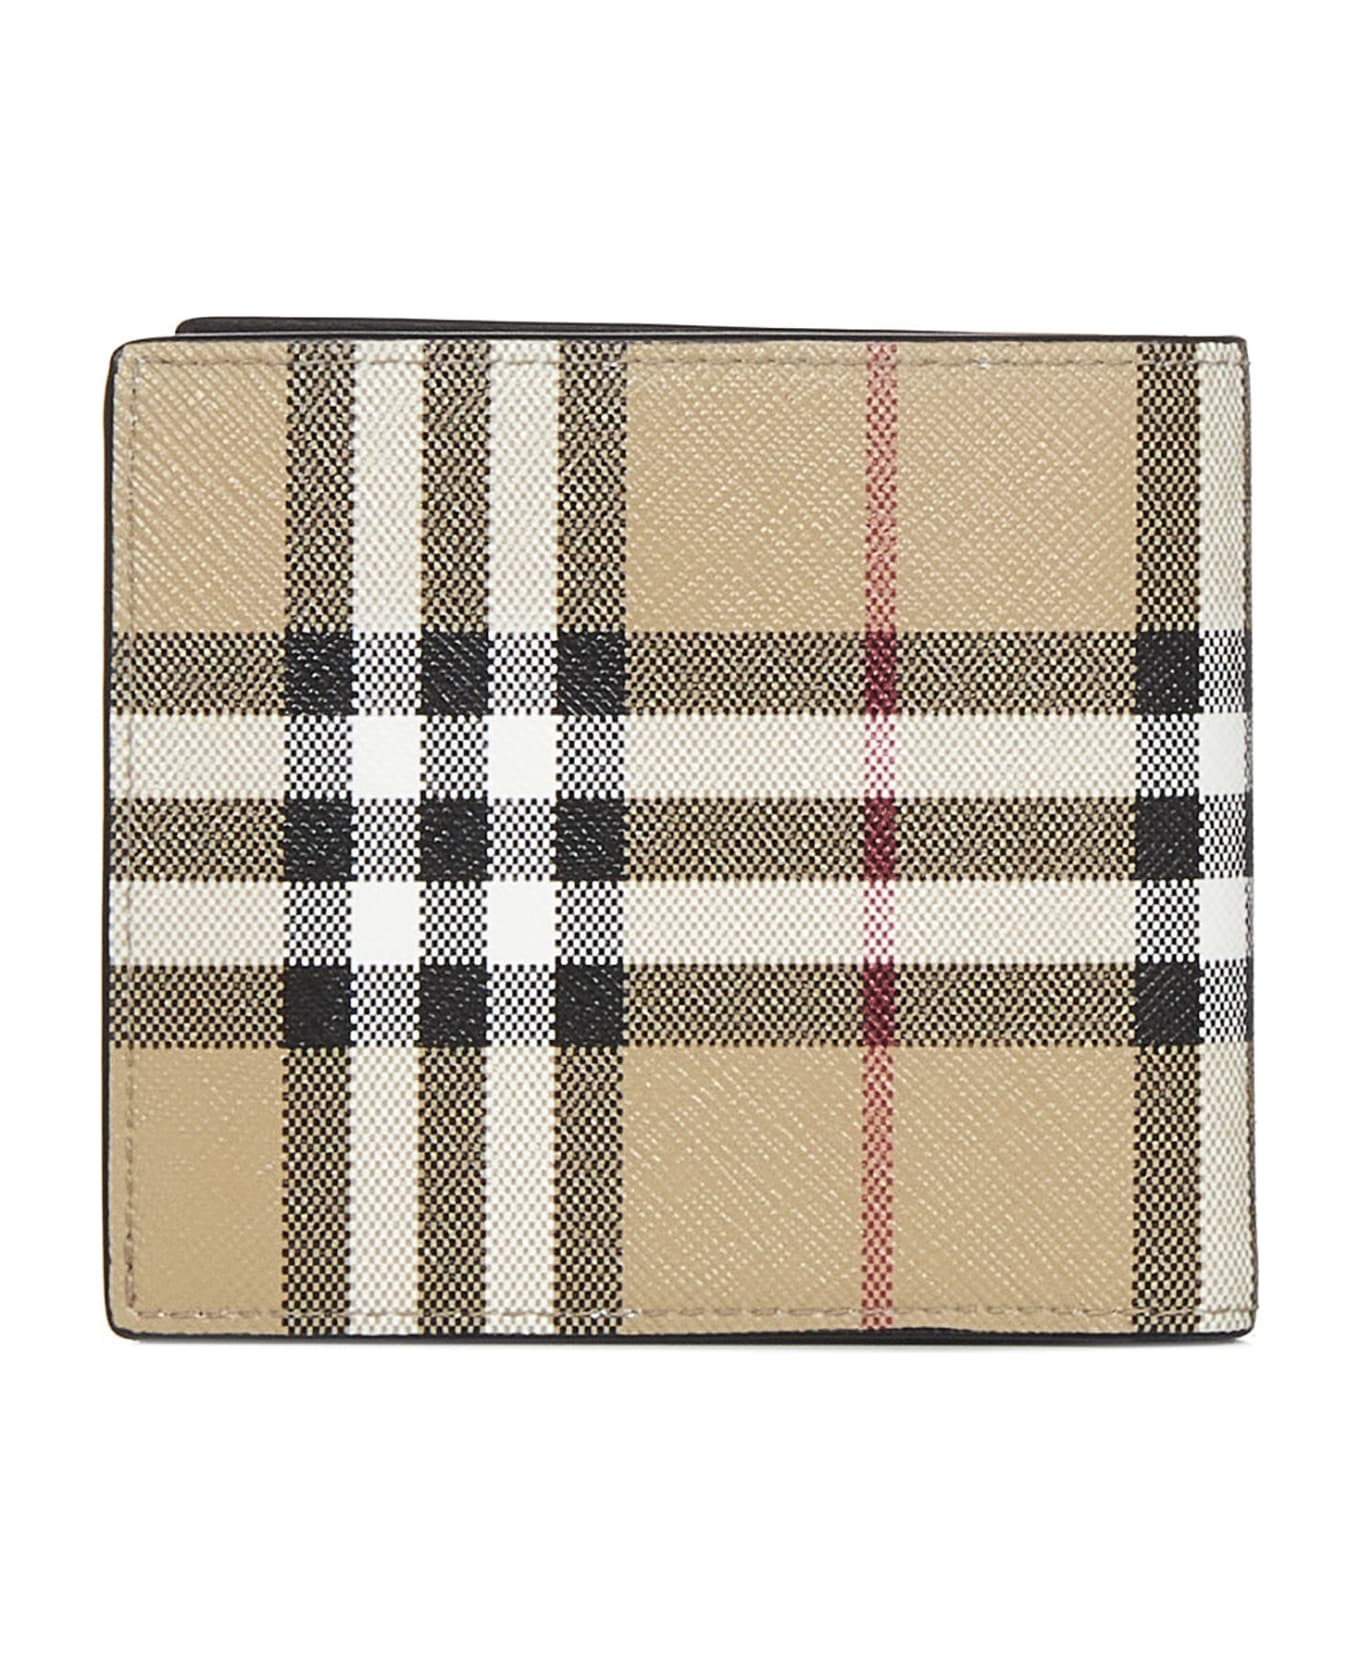 Burberry Buberry Wallet - Archive Beige